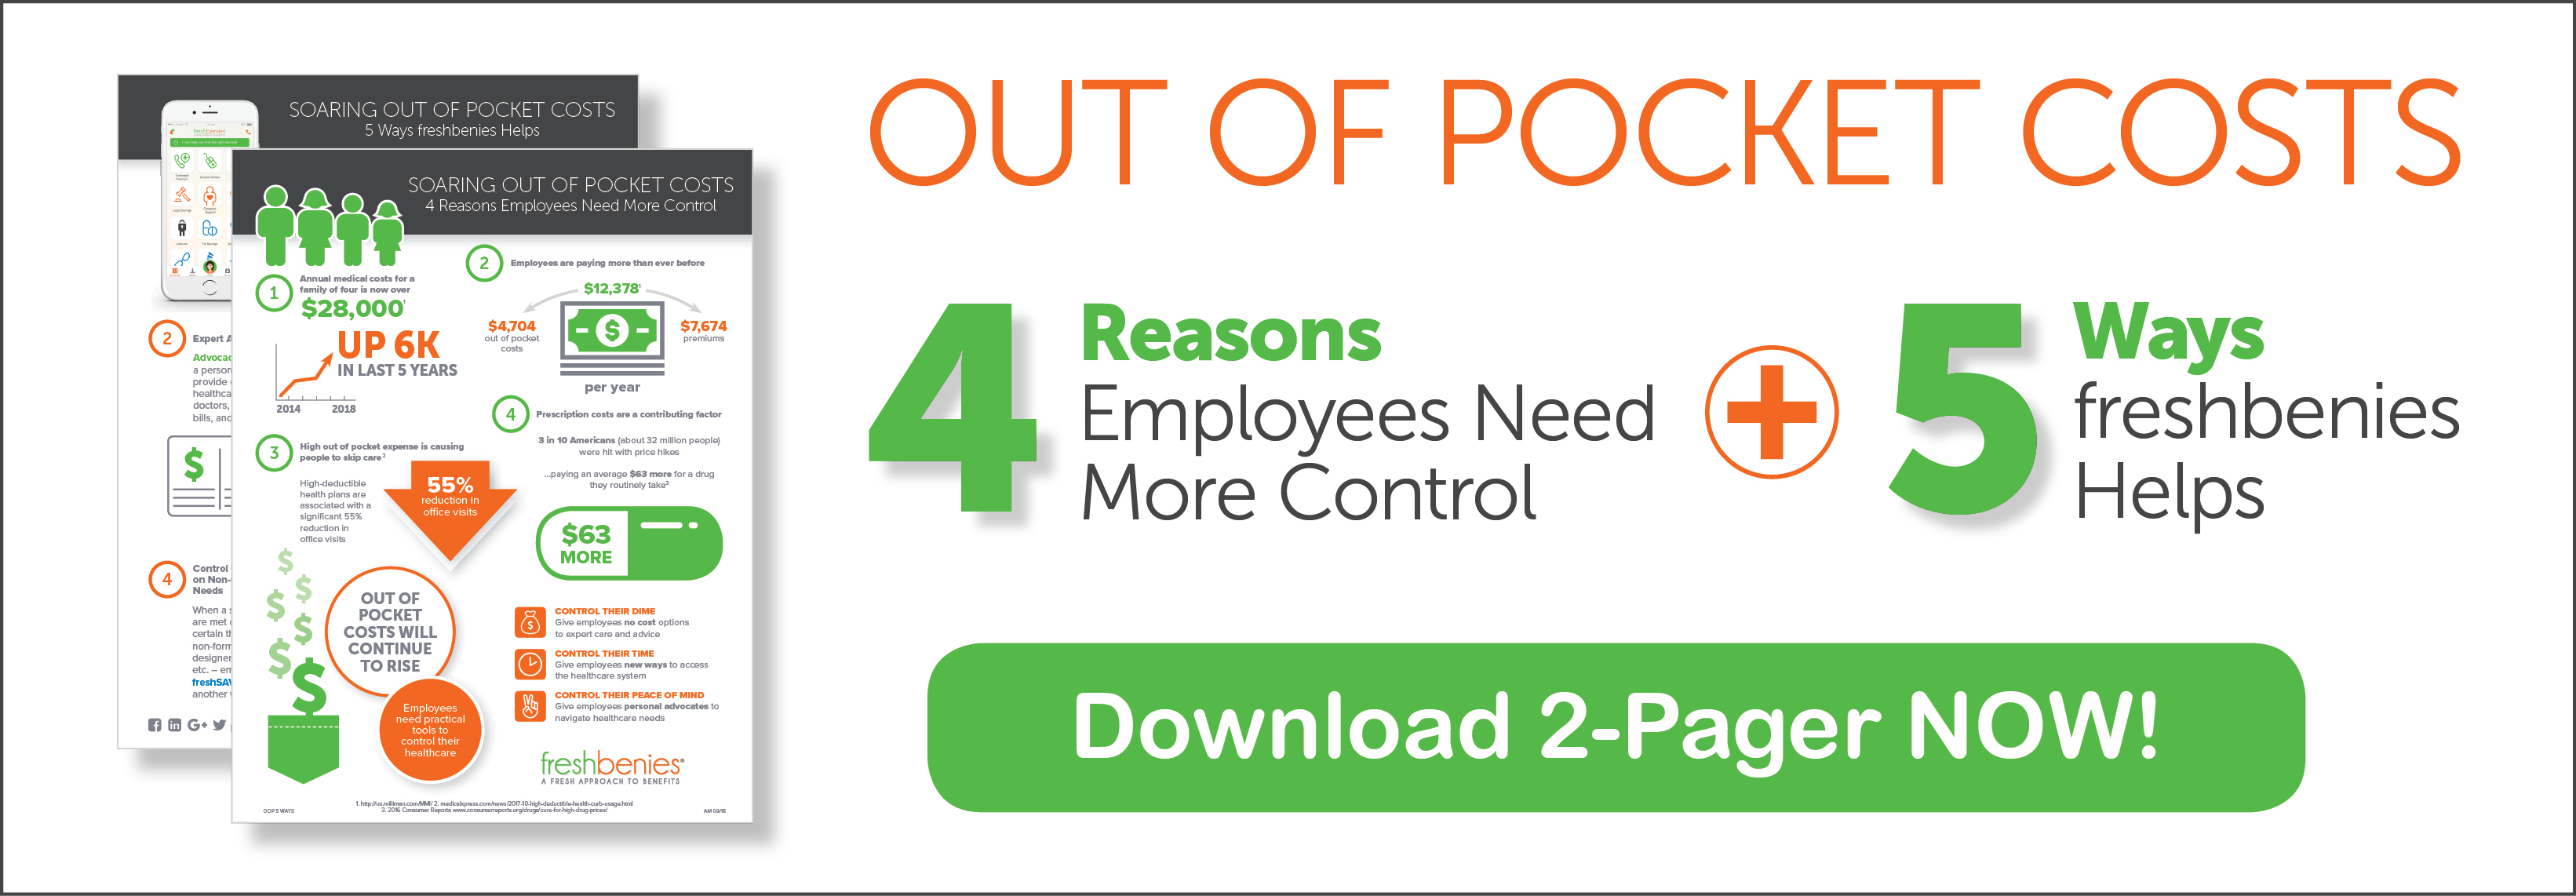 5 Ways to Help with Out of Pocket Costs